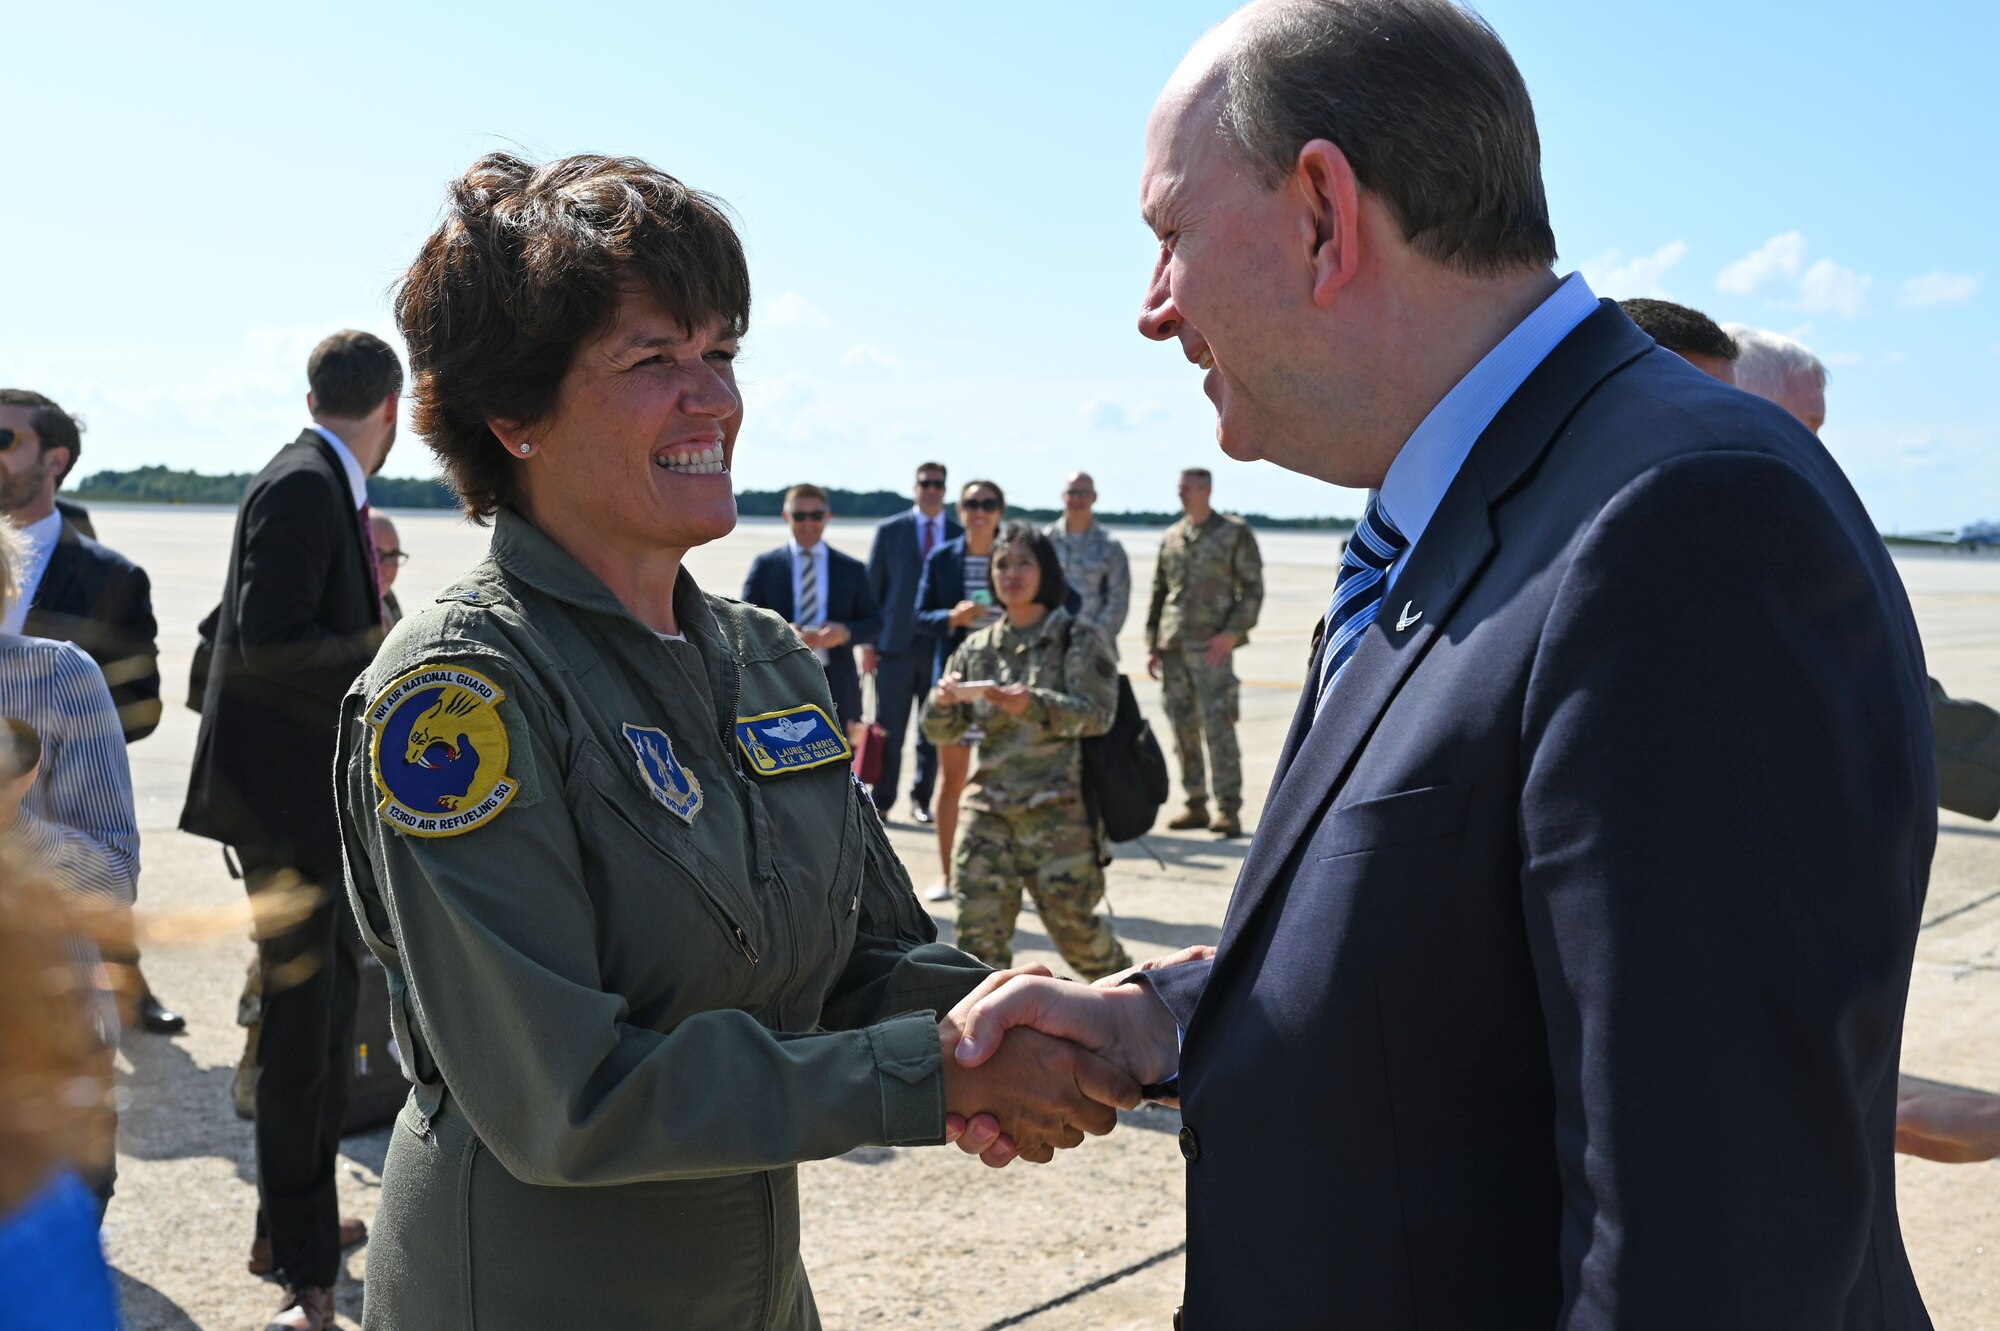 Brig. Gen. Laurie Farris, commander of the New Hampshire Air National Guard, greets Matthew Donovan, the acting secretary of the Air Force, on the flight line at Pease ANGB, Aug. 8, 2019. Dononan attended a welcoming event to commemorate the arrival of the new KC-46A air refueling tanker.  (U. S. Air National Guard photo by Staff Sgt. Charles Johnston)